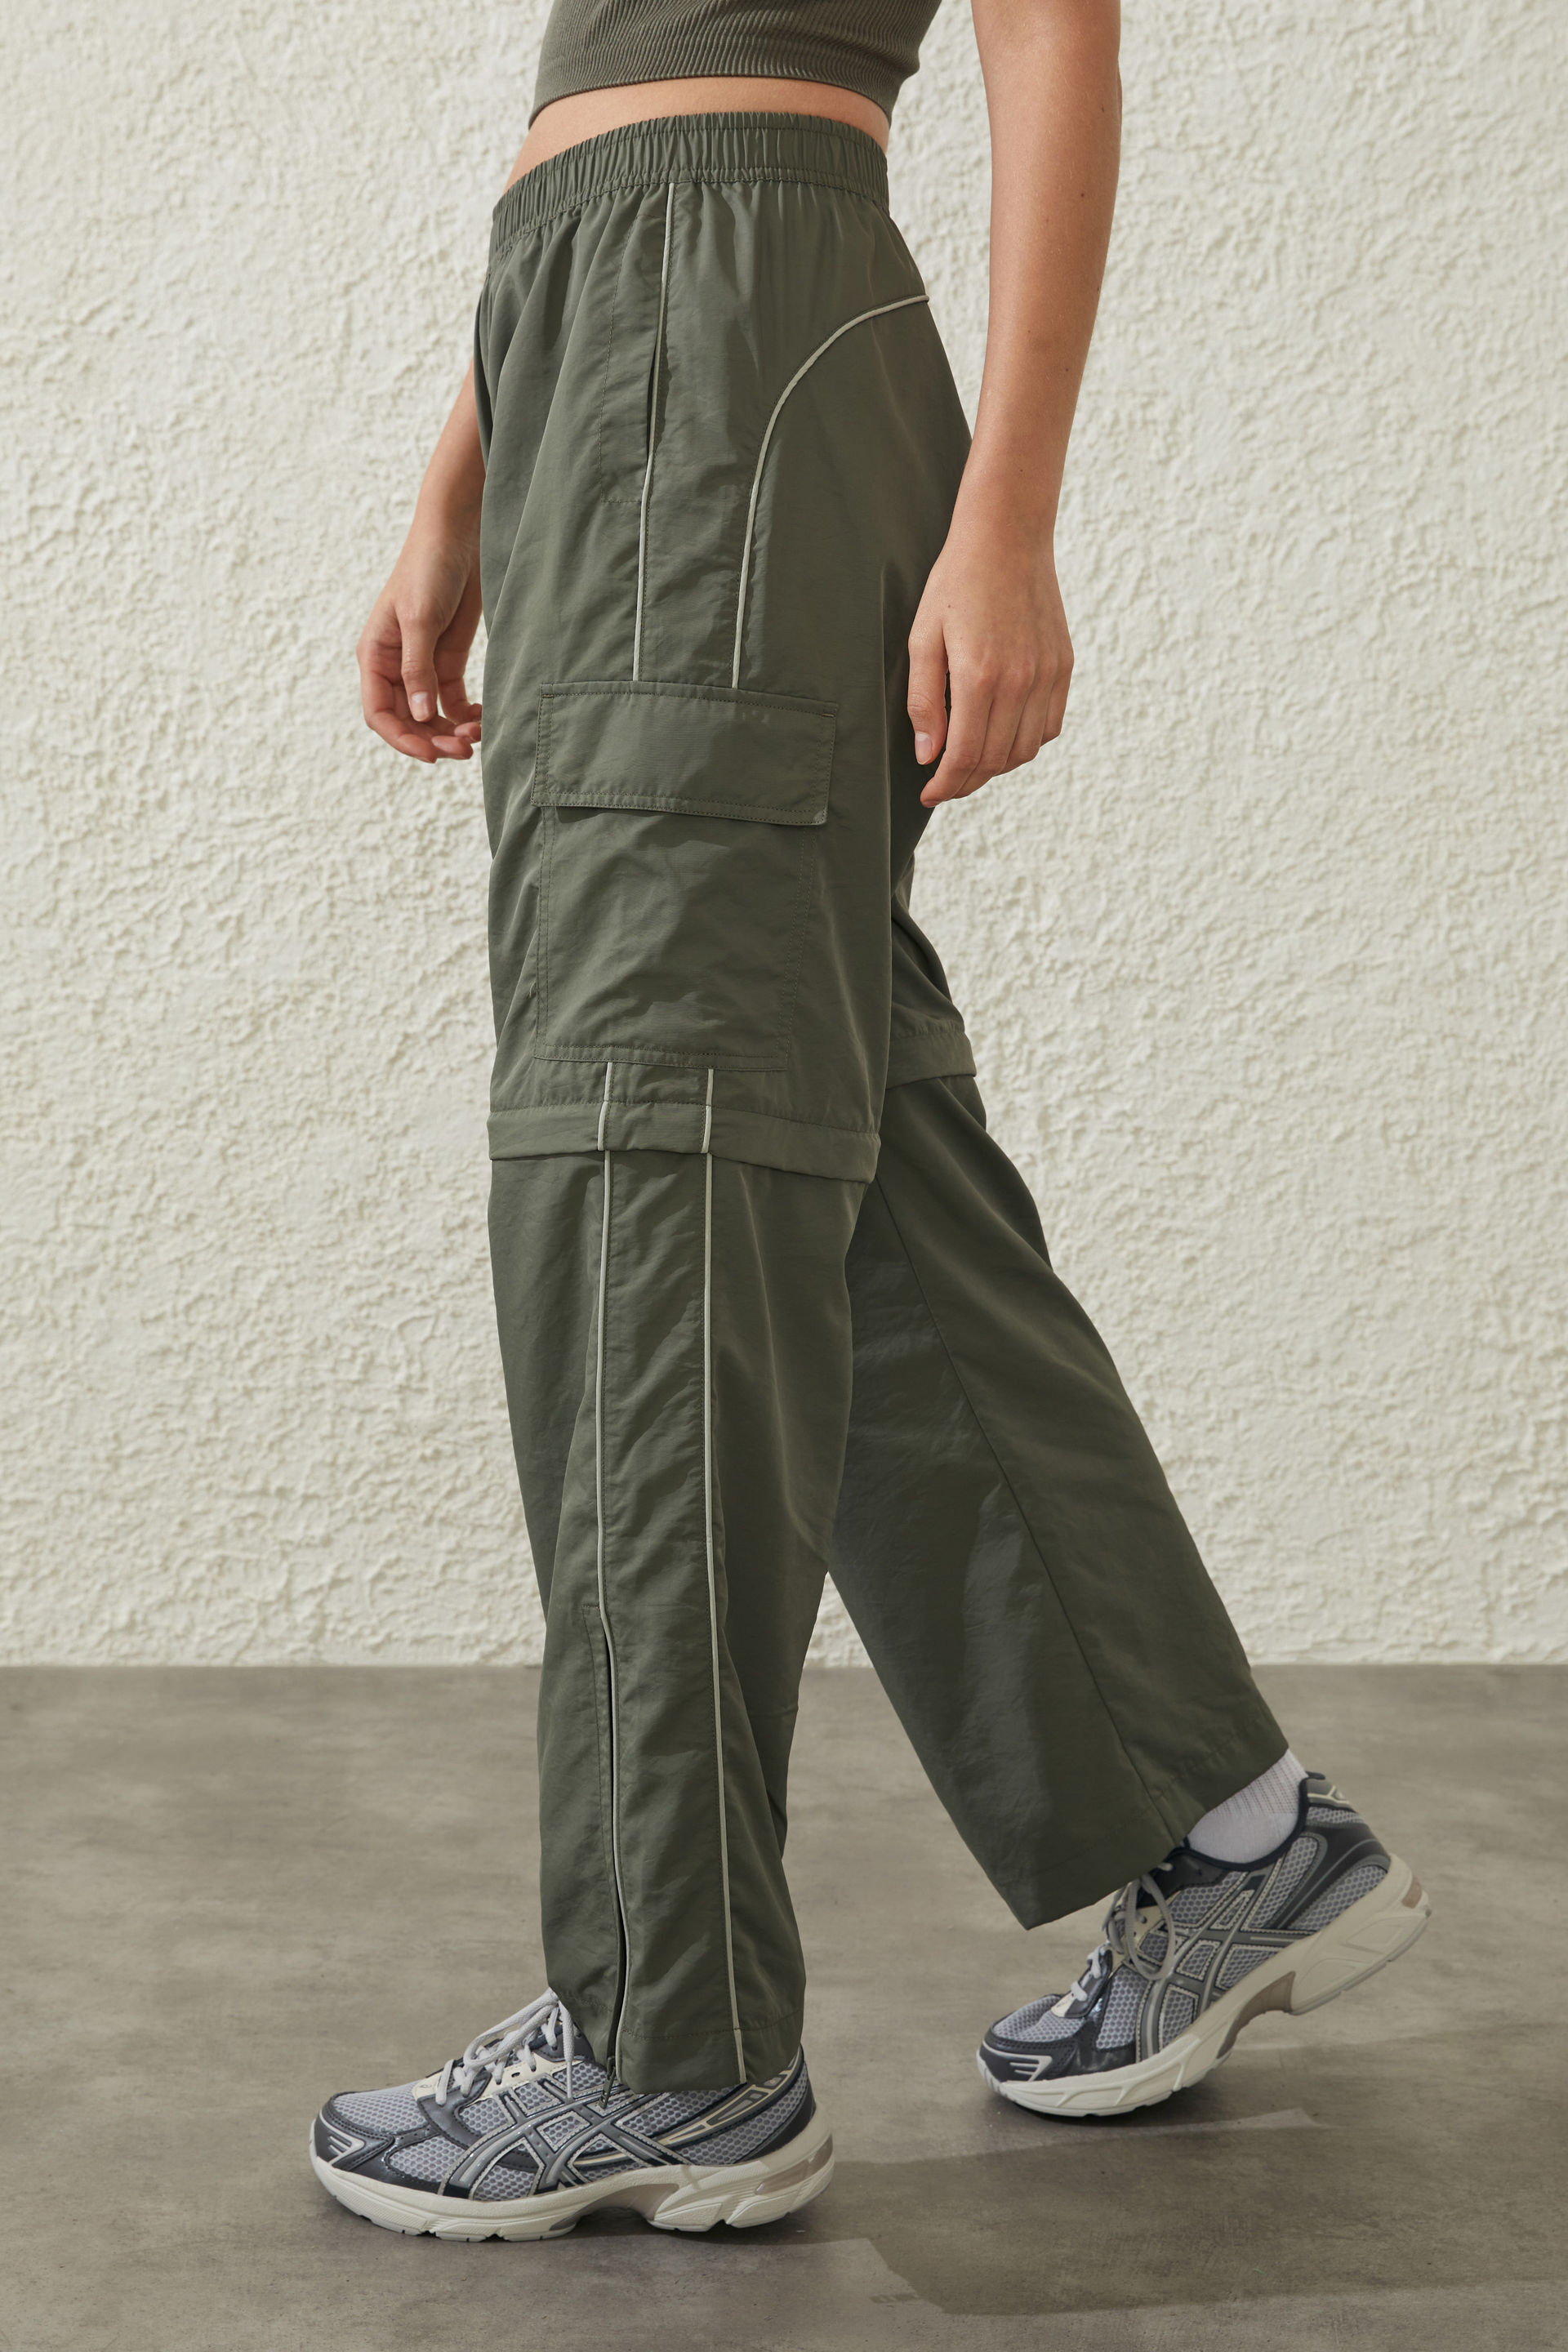 Amazon.com: PINSPARK Khaki Cargo Hiking Pants with Pockets for Women Zip Off  Fishing Pants Quick Dry Waterproof Pants Convertible Shorts Sweatpants S :  Clothing, Shoes & Jewelry